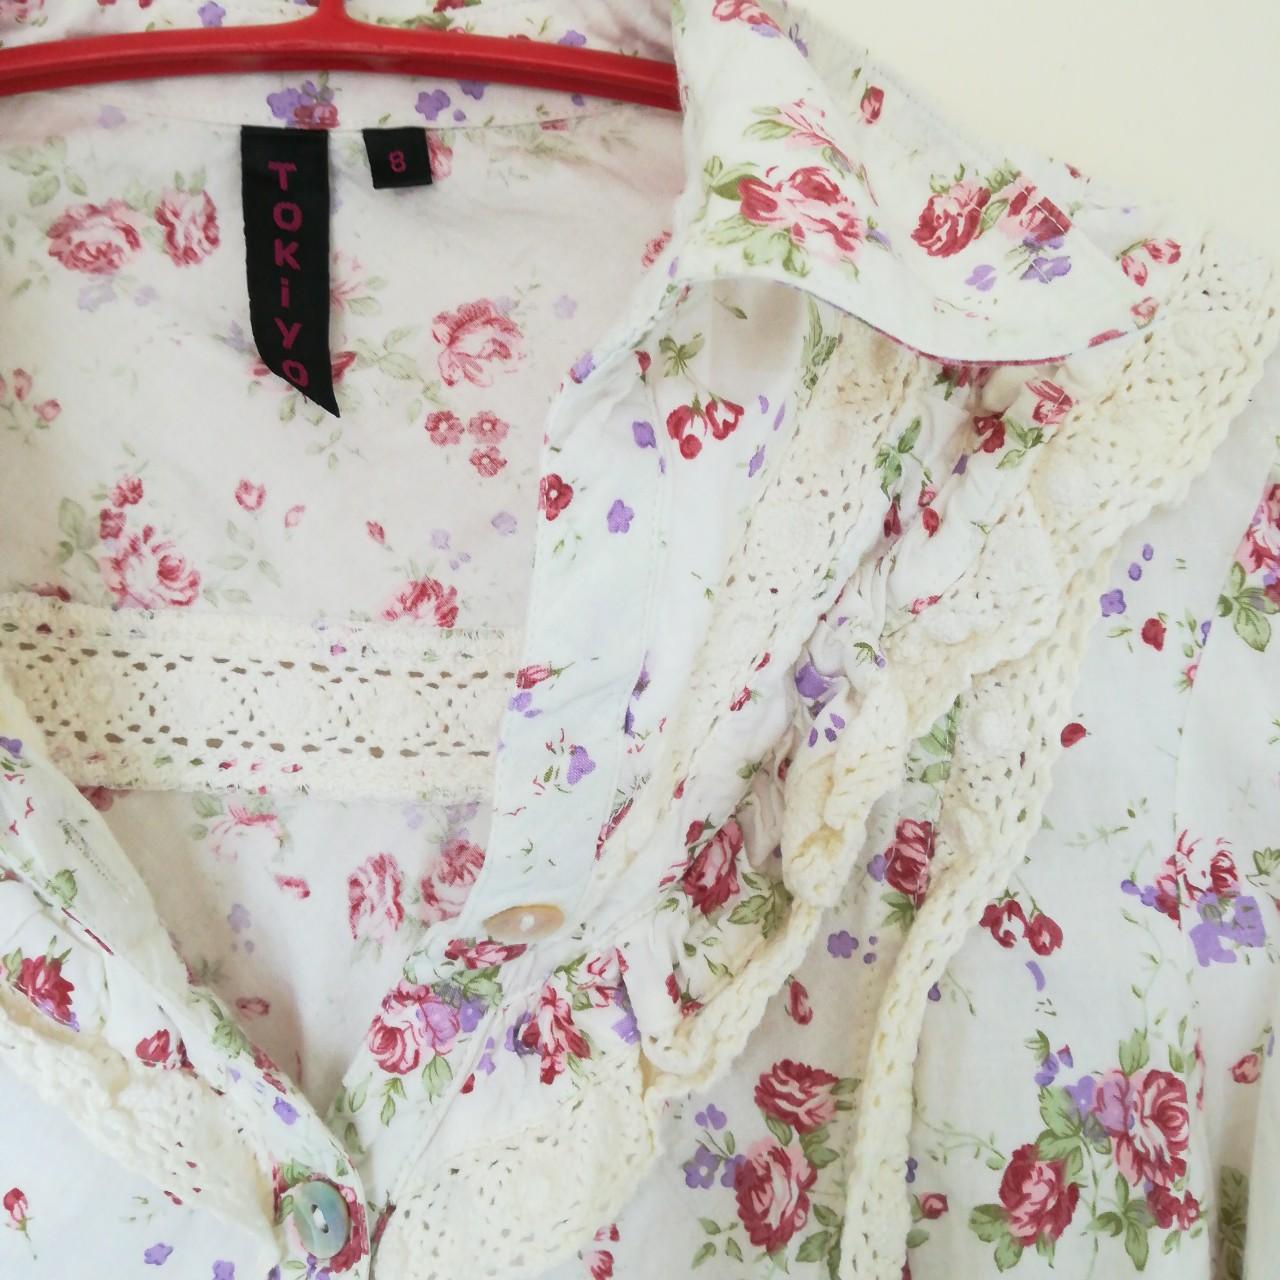 Pretty white floral blouse / shirt - New without... - Depop